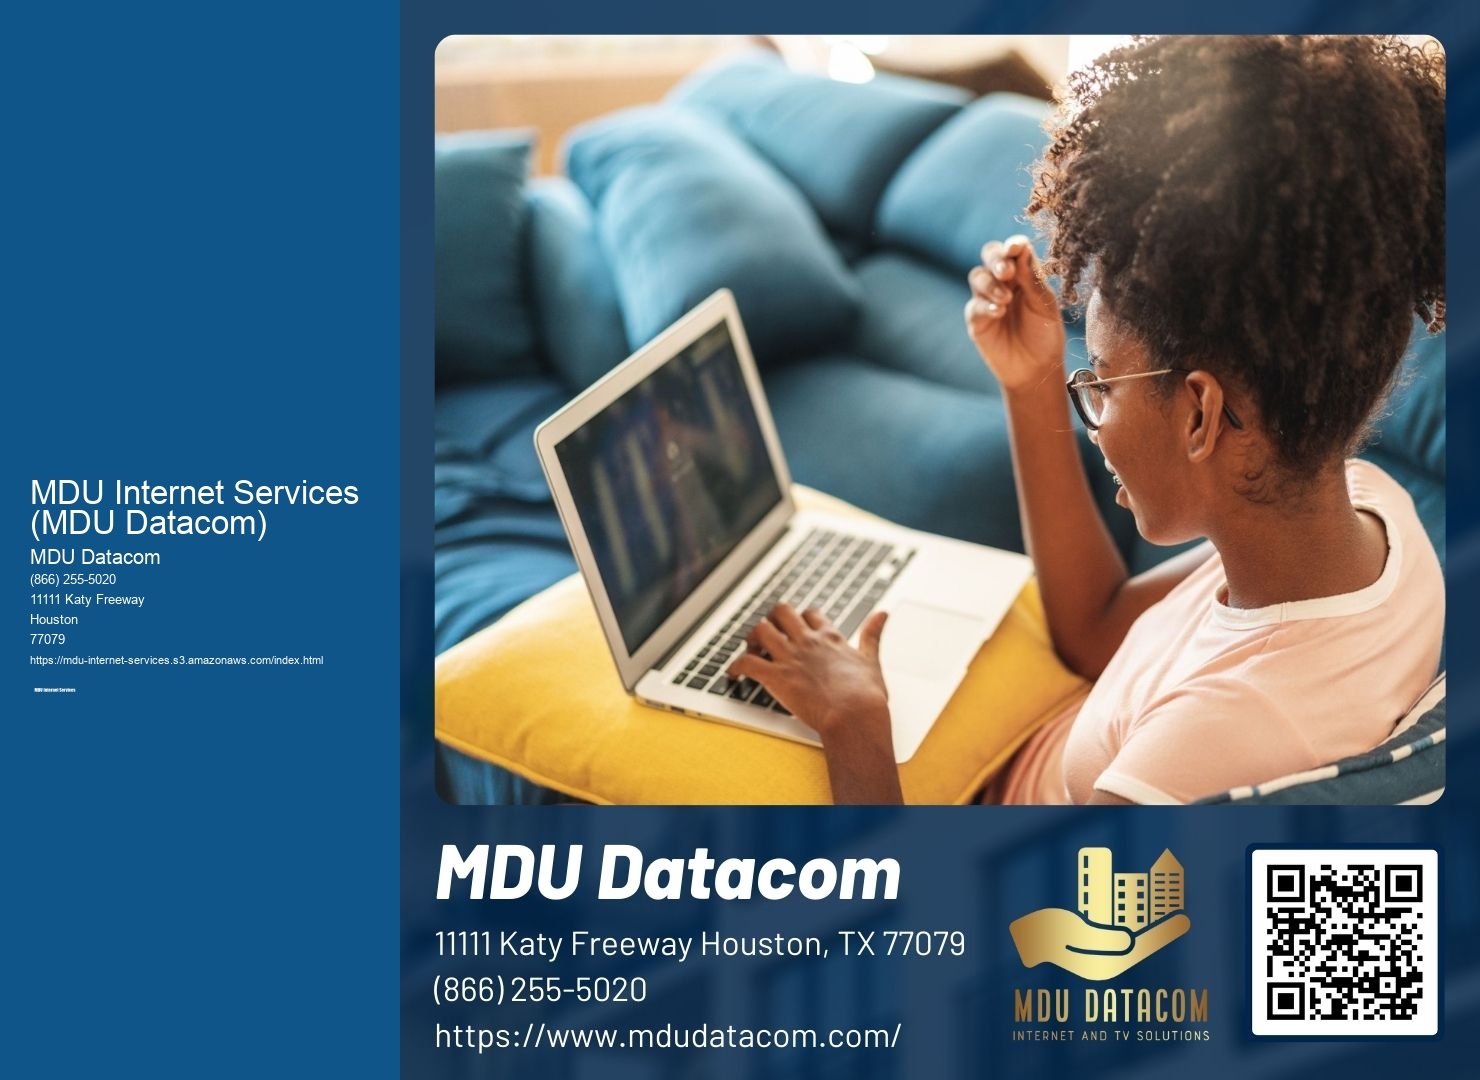 Can MDU internet services be customized to meet the specific needs of a business or residential building?